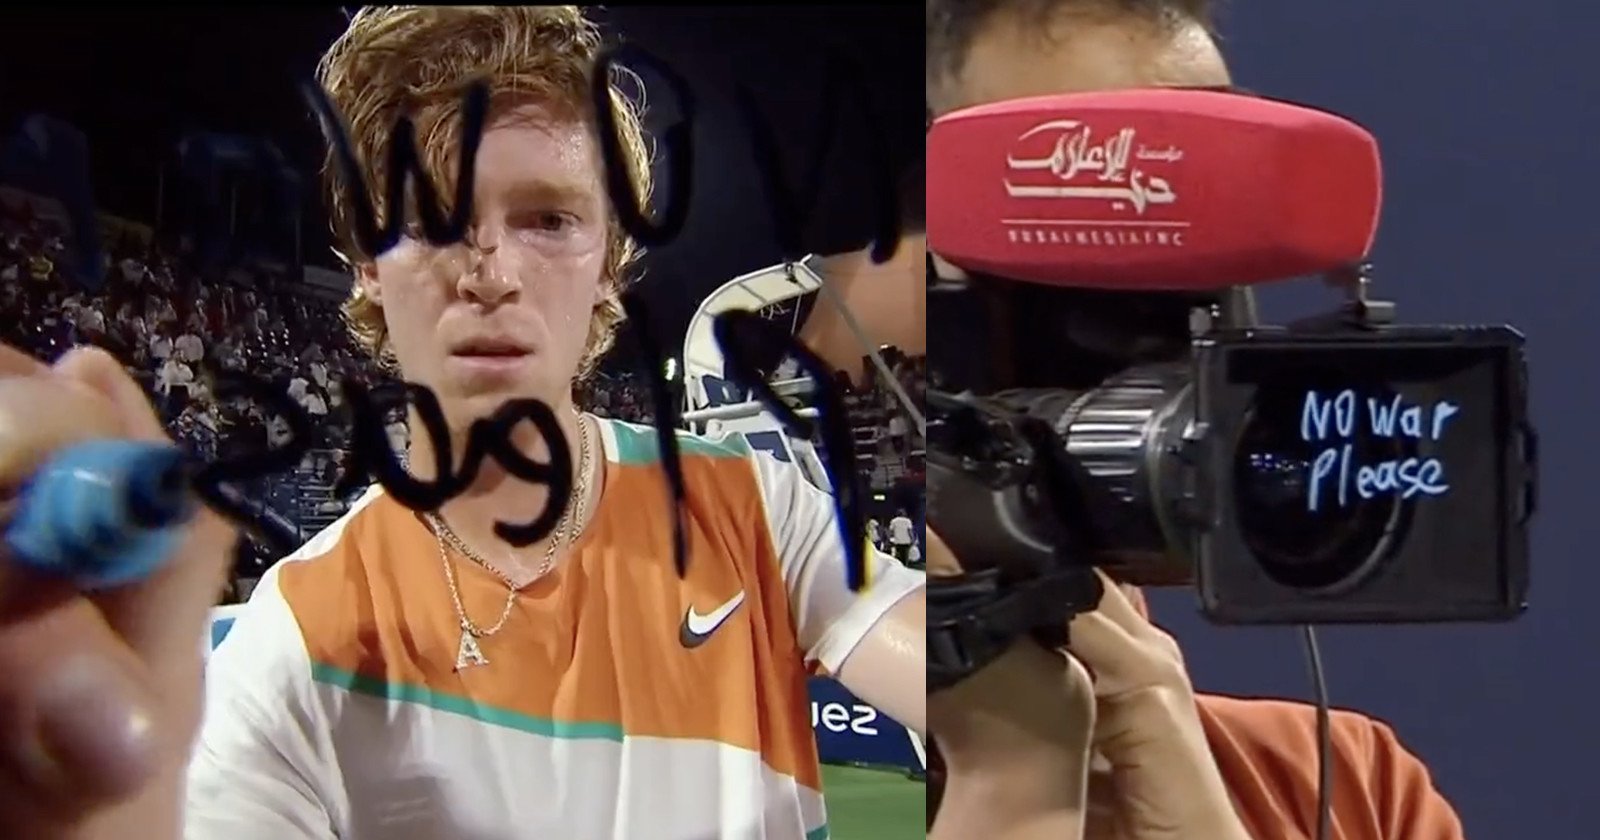 Andrey Rublev wrote "No War Please" on a live television camera